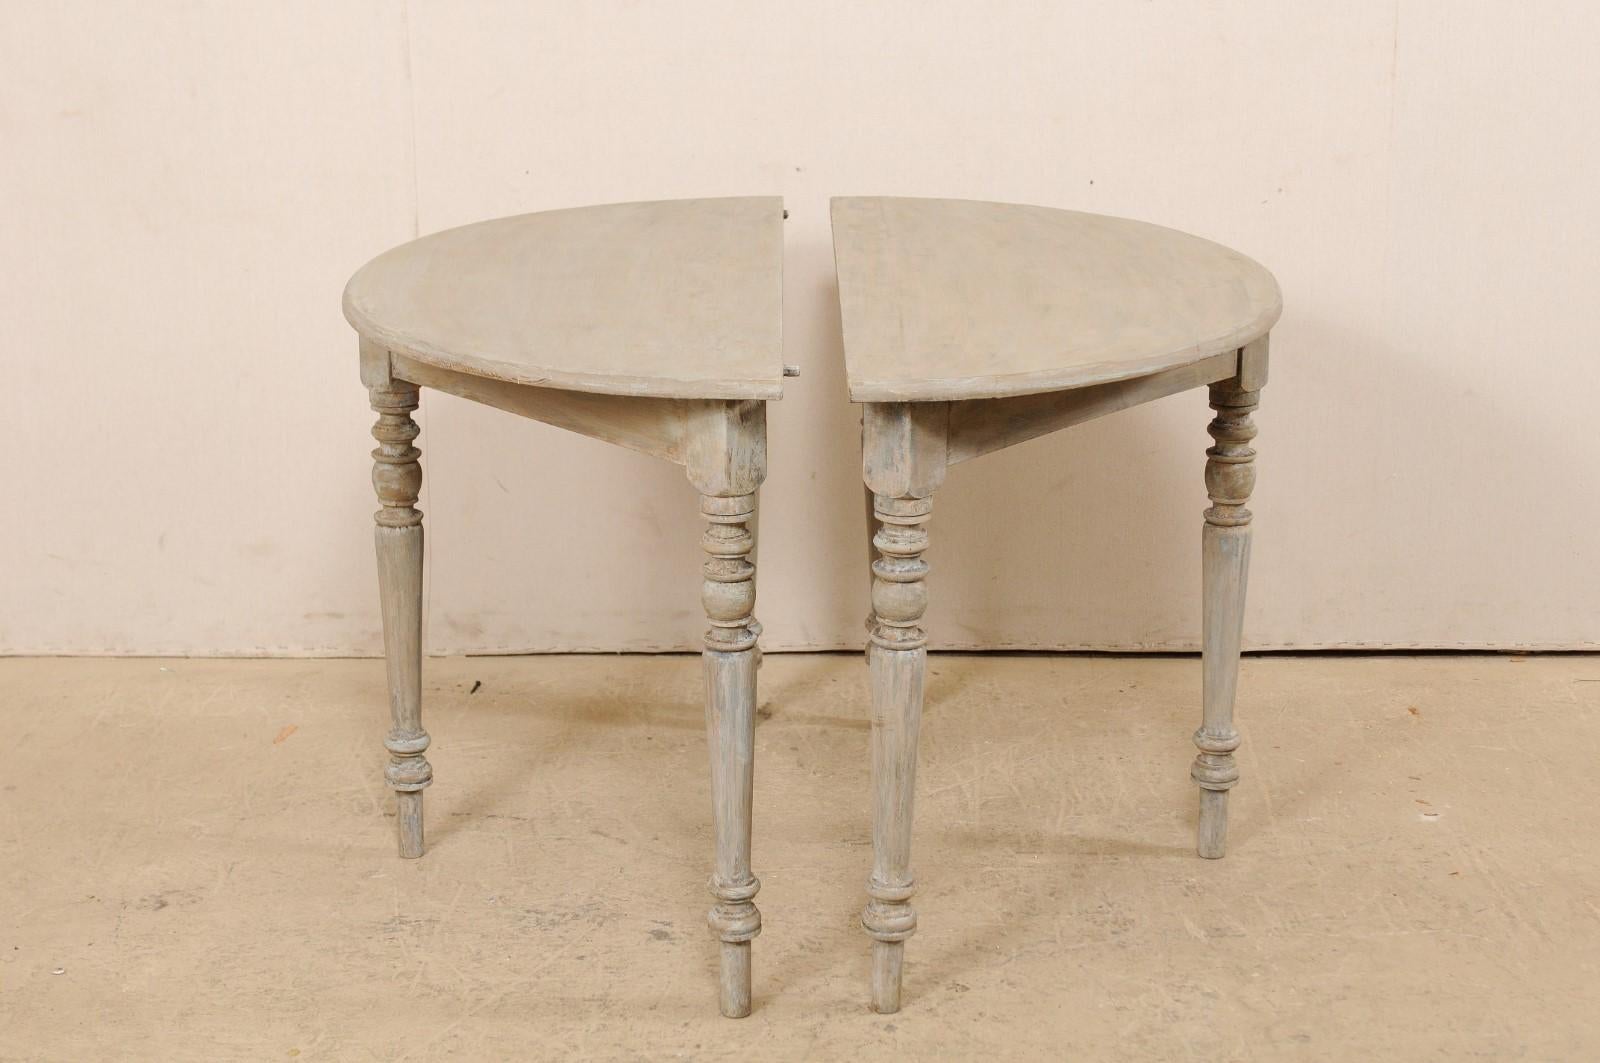 Wood Antique Swedish Demilune Console Tables, Gray with Taupe & Blue Undertones, Pair